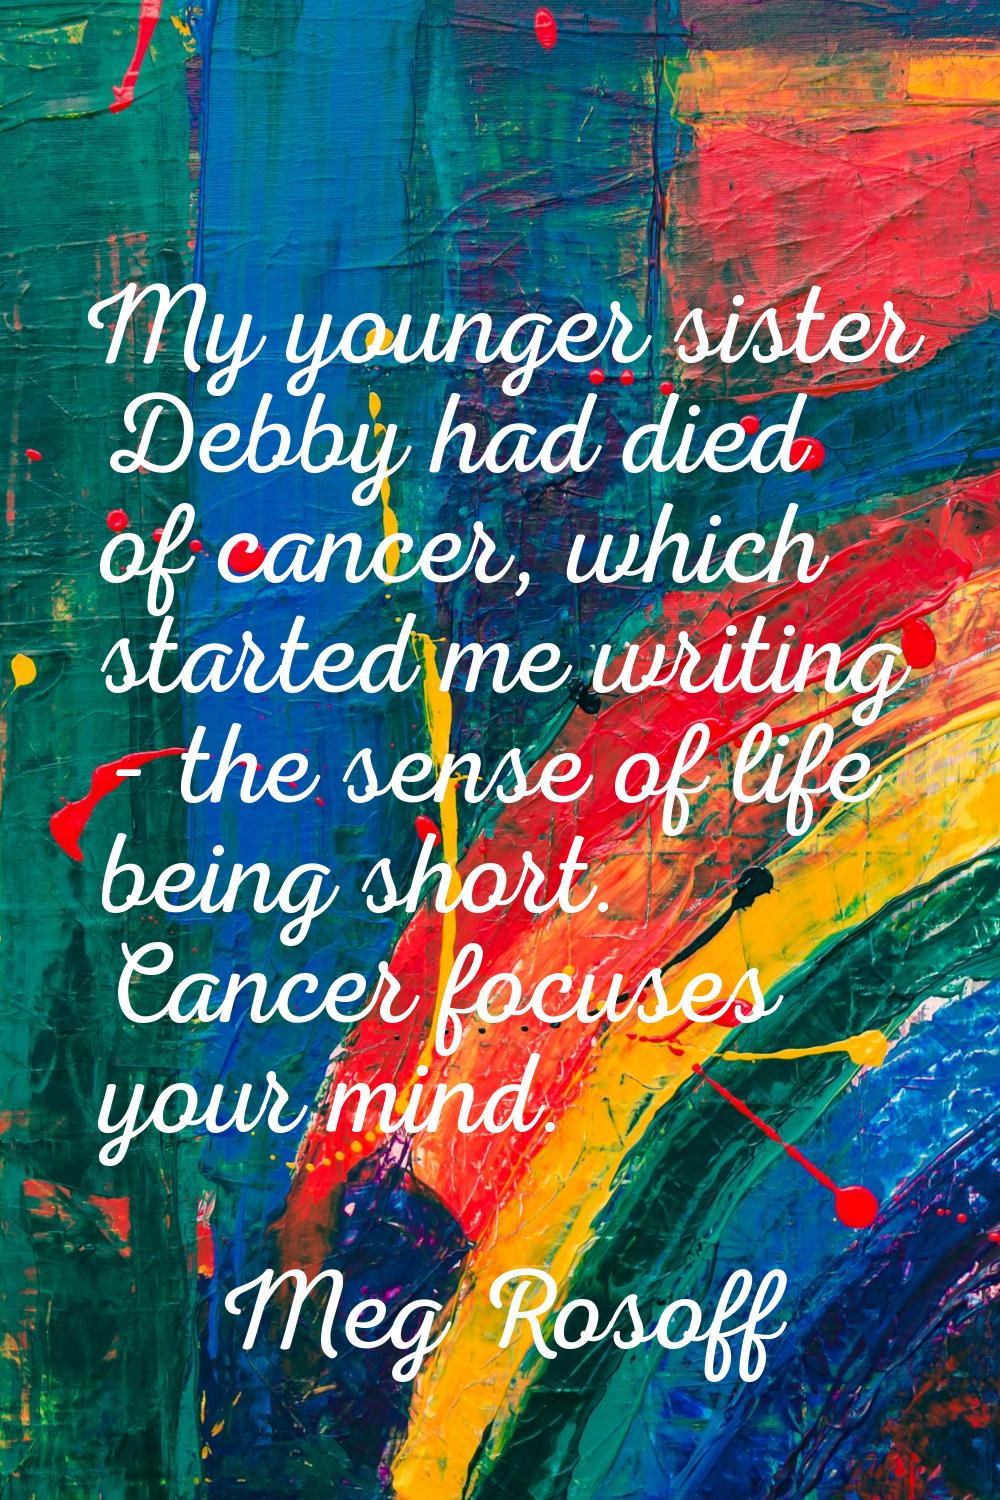 My younger sister Debby had died of cancer, which started me writing - the sense of life being shor